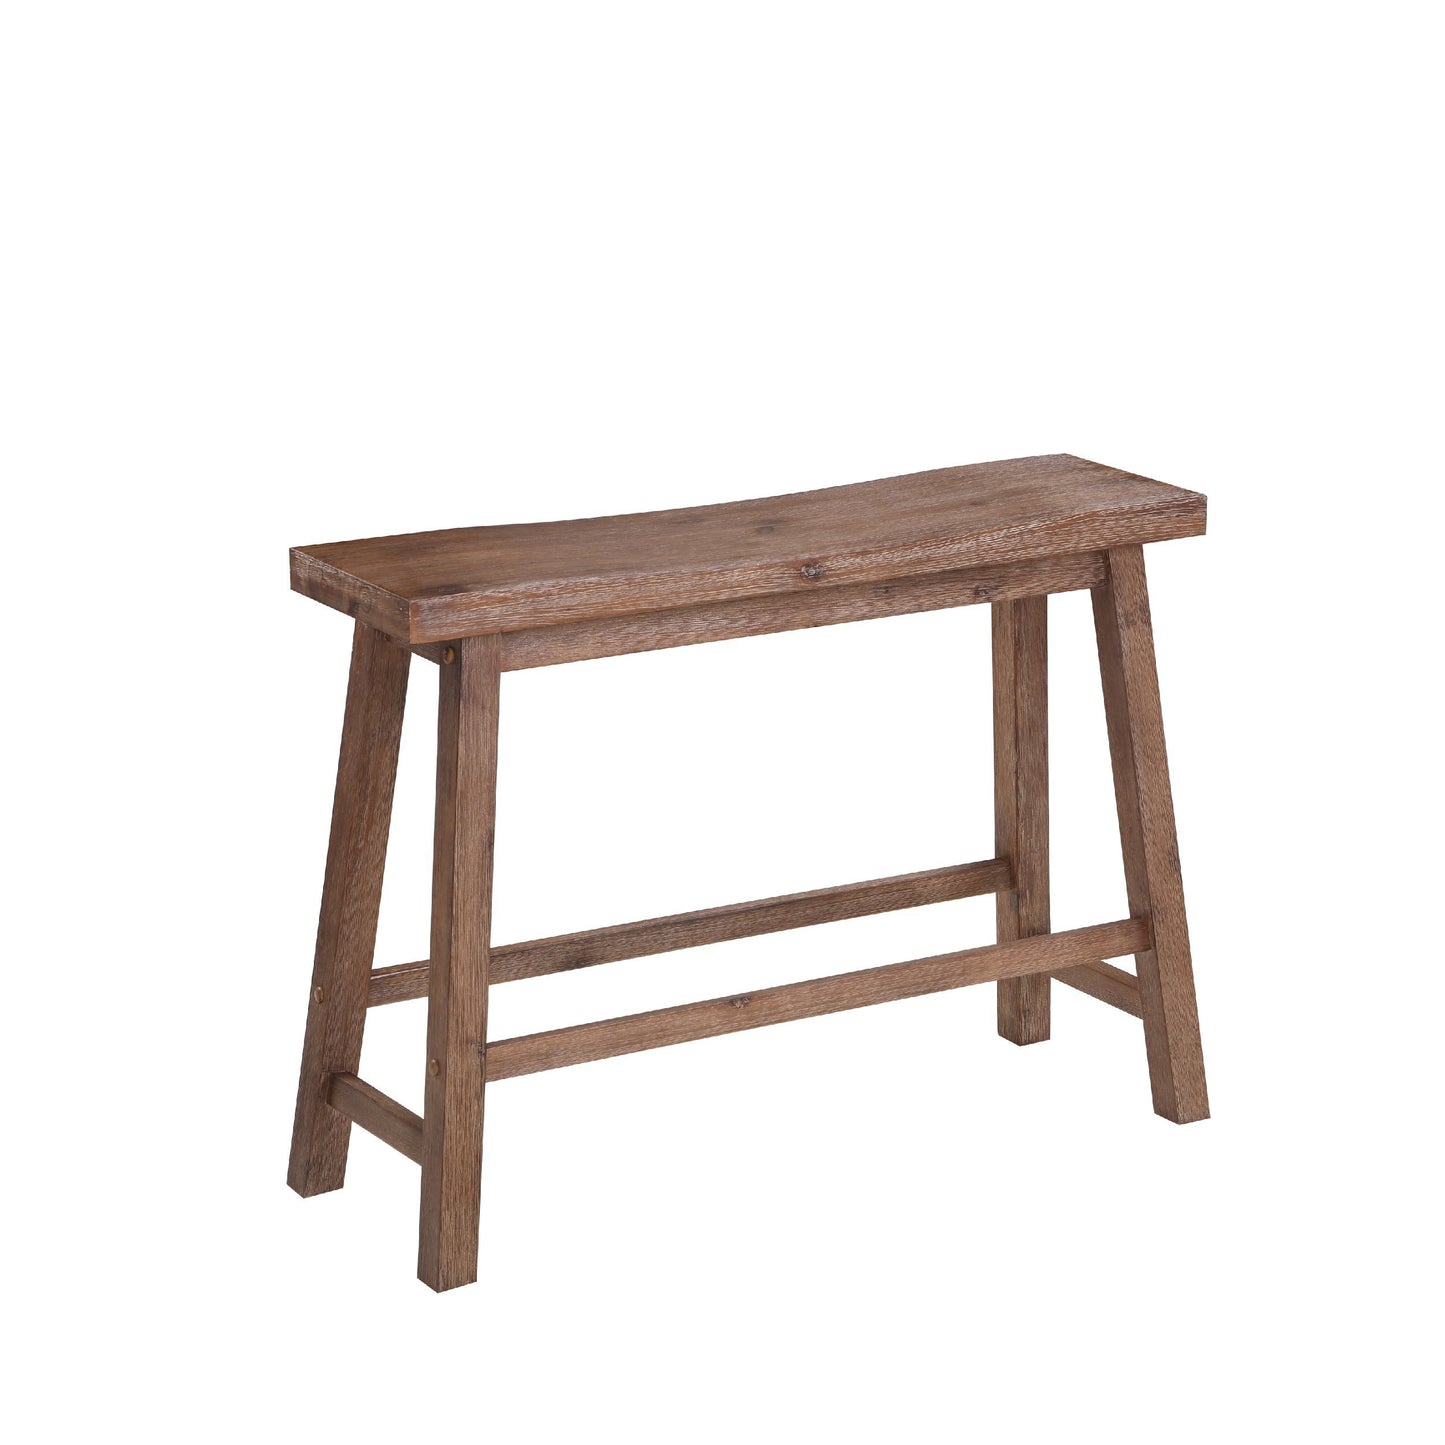 Saddle Seat Wooden Bench with Canted Frame, Oak Brown